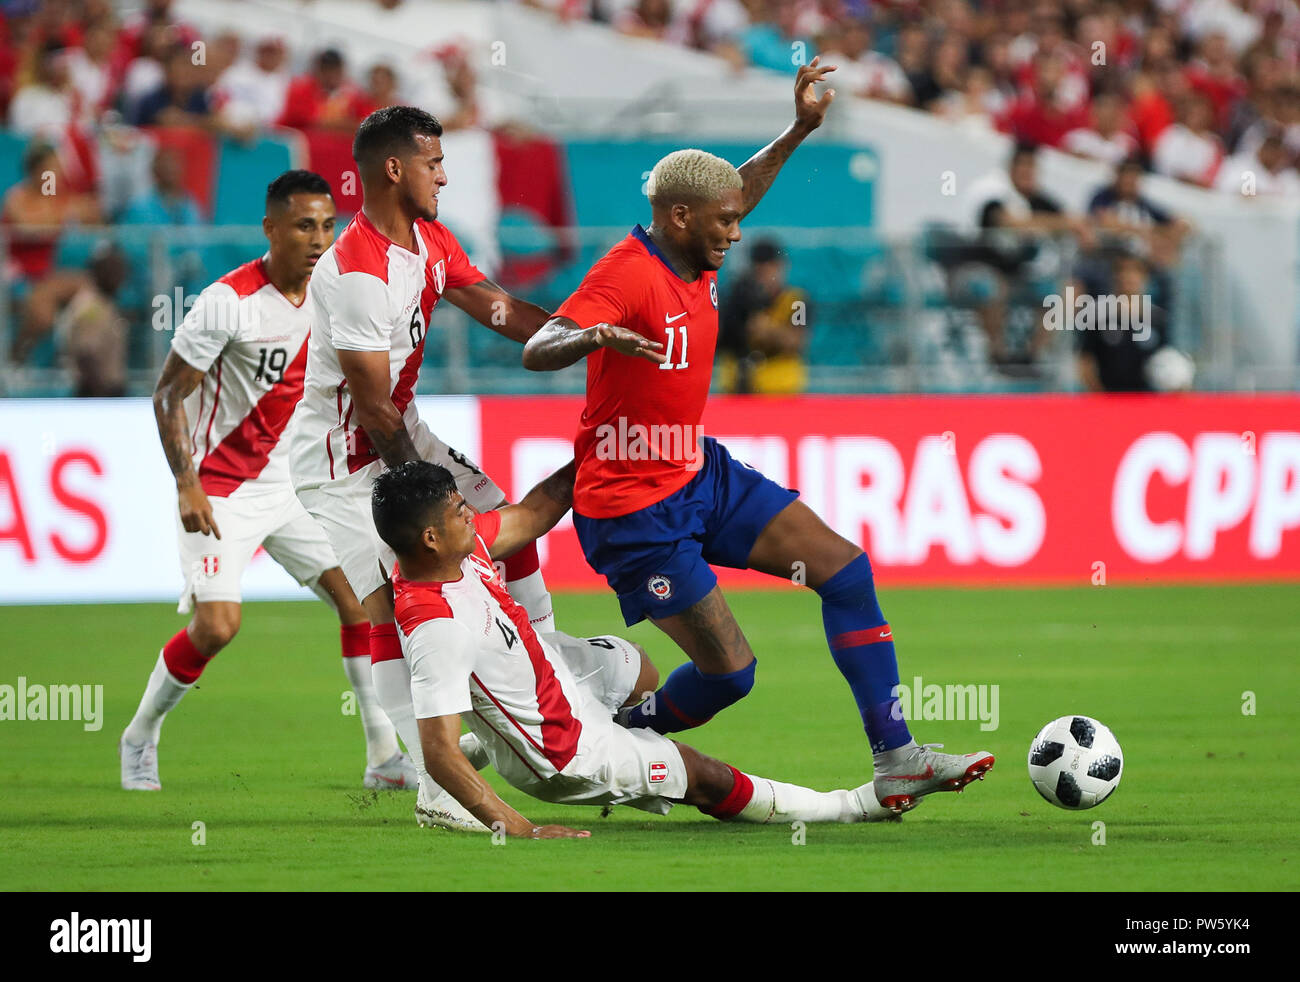 Miami Gardens, Florida, USA. 12th Oct, 2018. Chile forward JUNIOR FERNANDES (11) is fouled by Peru defender ANDERSON SANTAMARIA (4) during an international friendly match between the Peru and Chile national soccer teams, at the Hard Rock Stadium in Miami Gardens, Florida. Credit: Mario Houben/ZUMA Wire/Alamy Live News Stock Photo